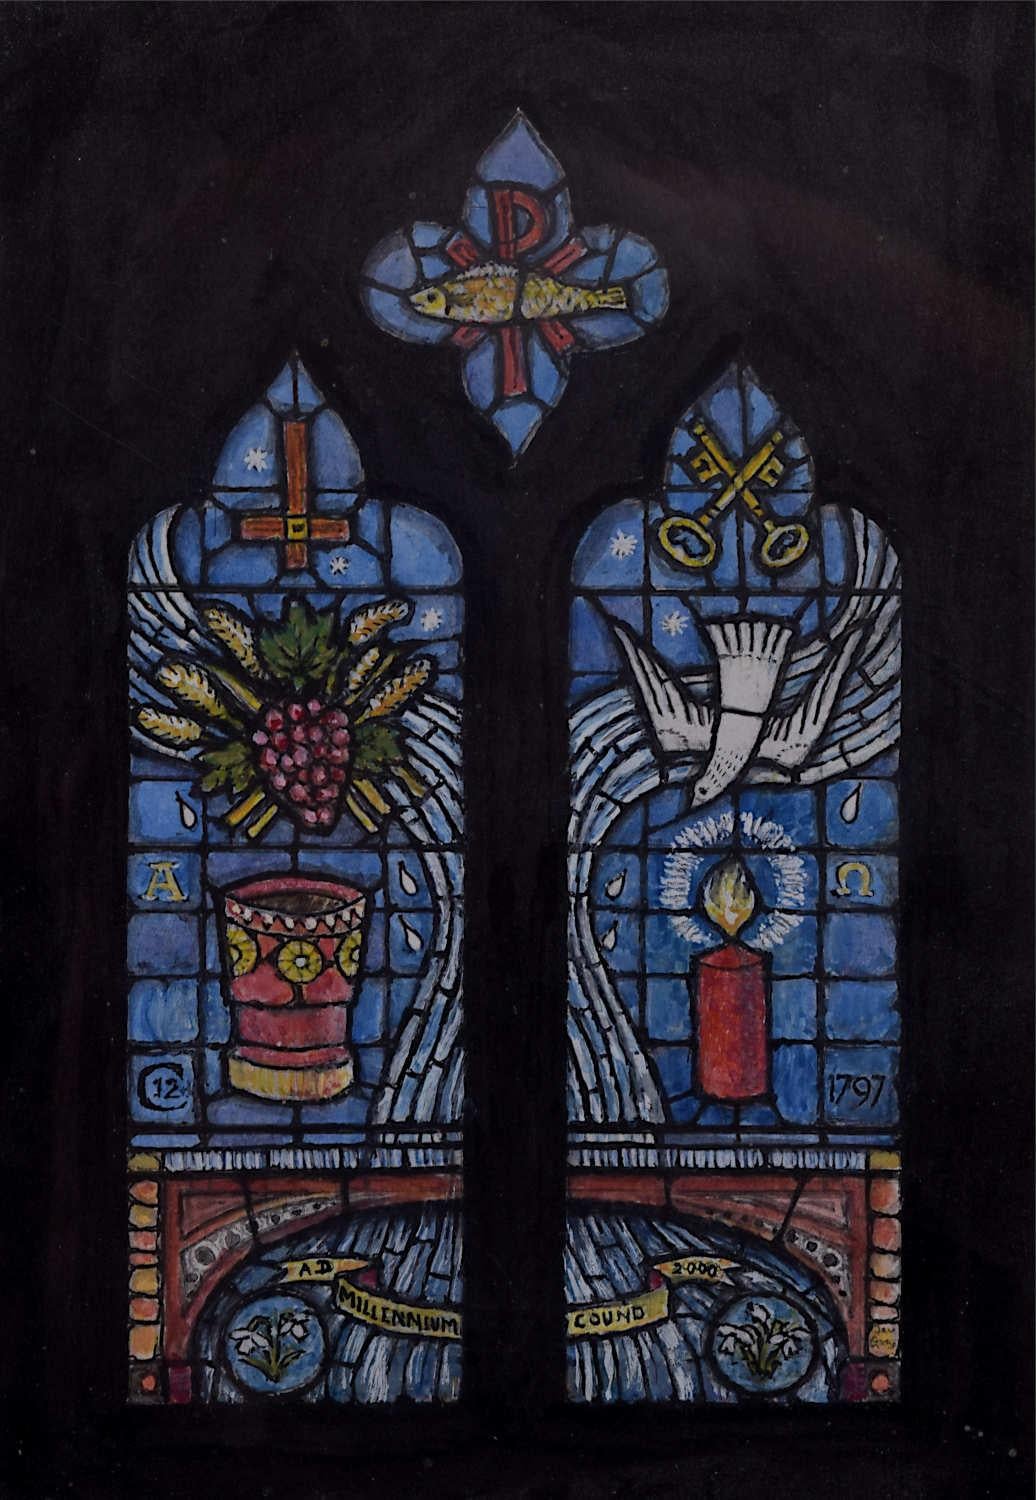 We acquired a series of watercolour stained glass designs from Jane Gray's studio. To find more scroll down to "More from this Seller" and below it click on "See all from this seller." 

Jane Gray (b.1931)
Stained Glass Design
Watercolour
16.5 x